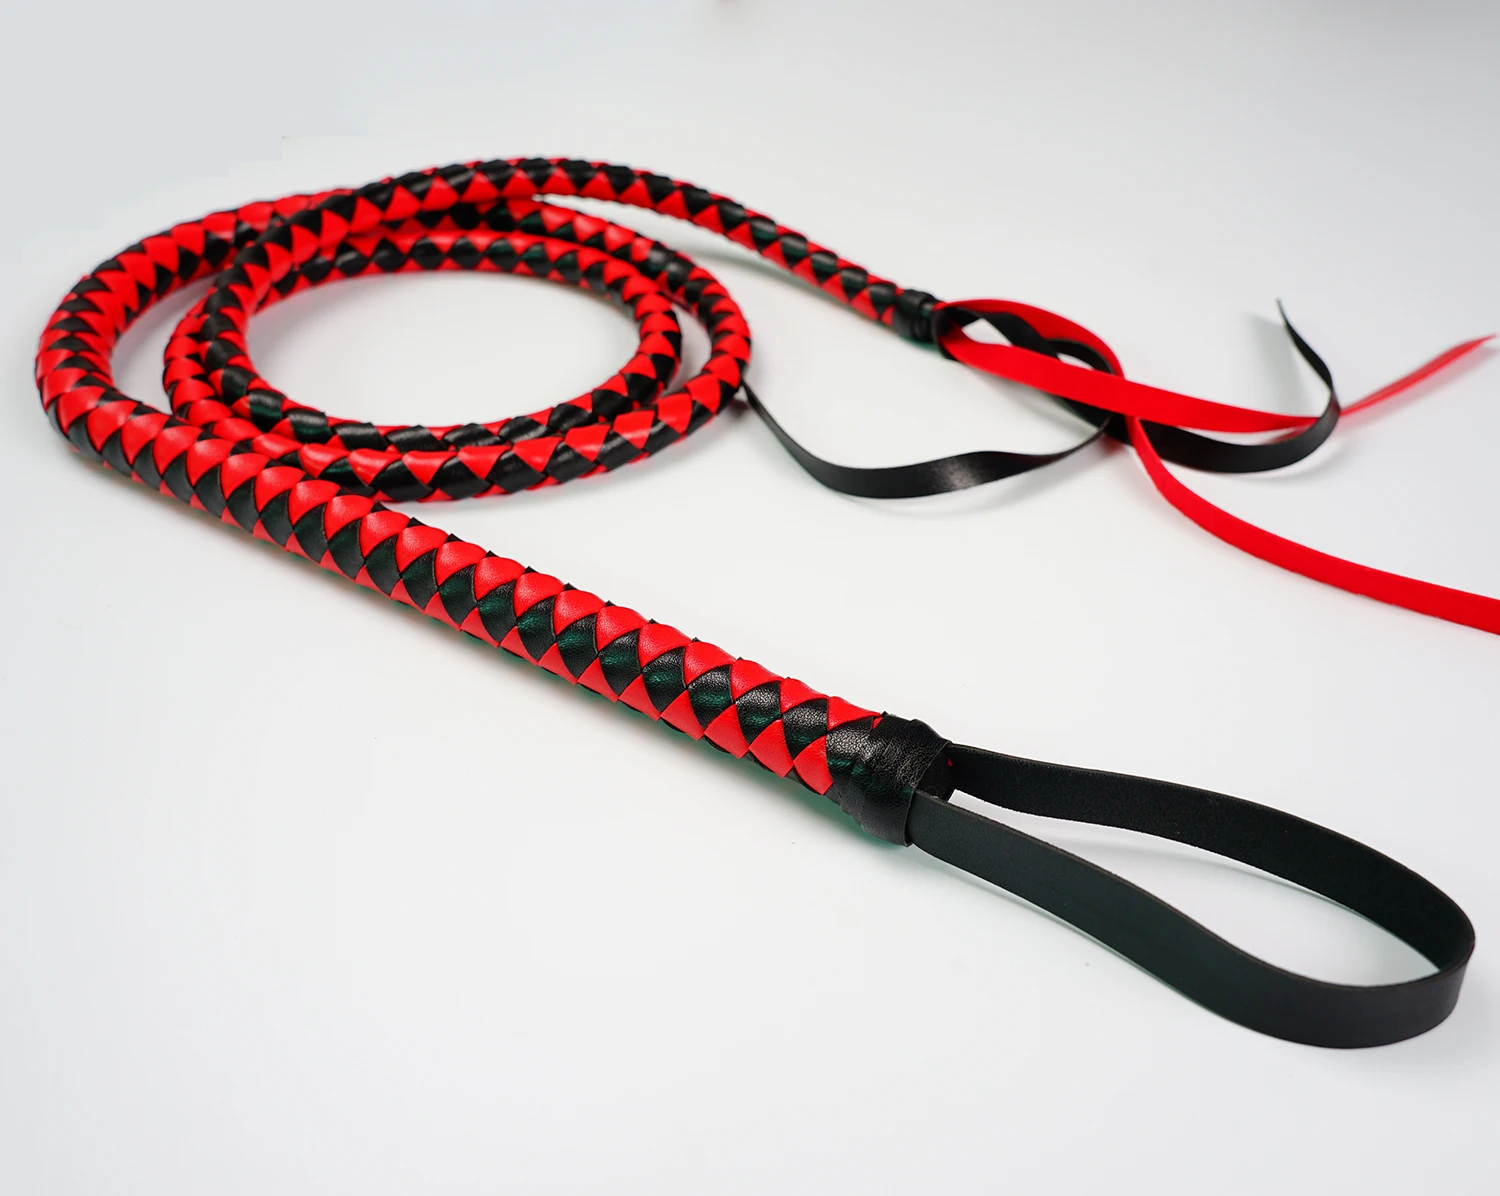 Leather Horse Whip Bull Whip, 4 Plait Bullwhip, 6 Feet - Color Choice: White or Red